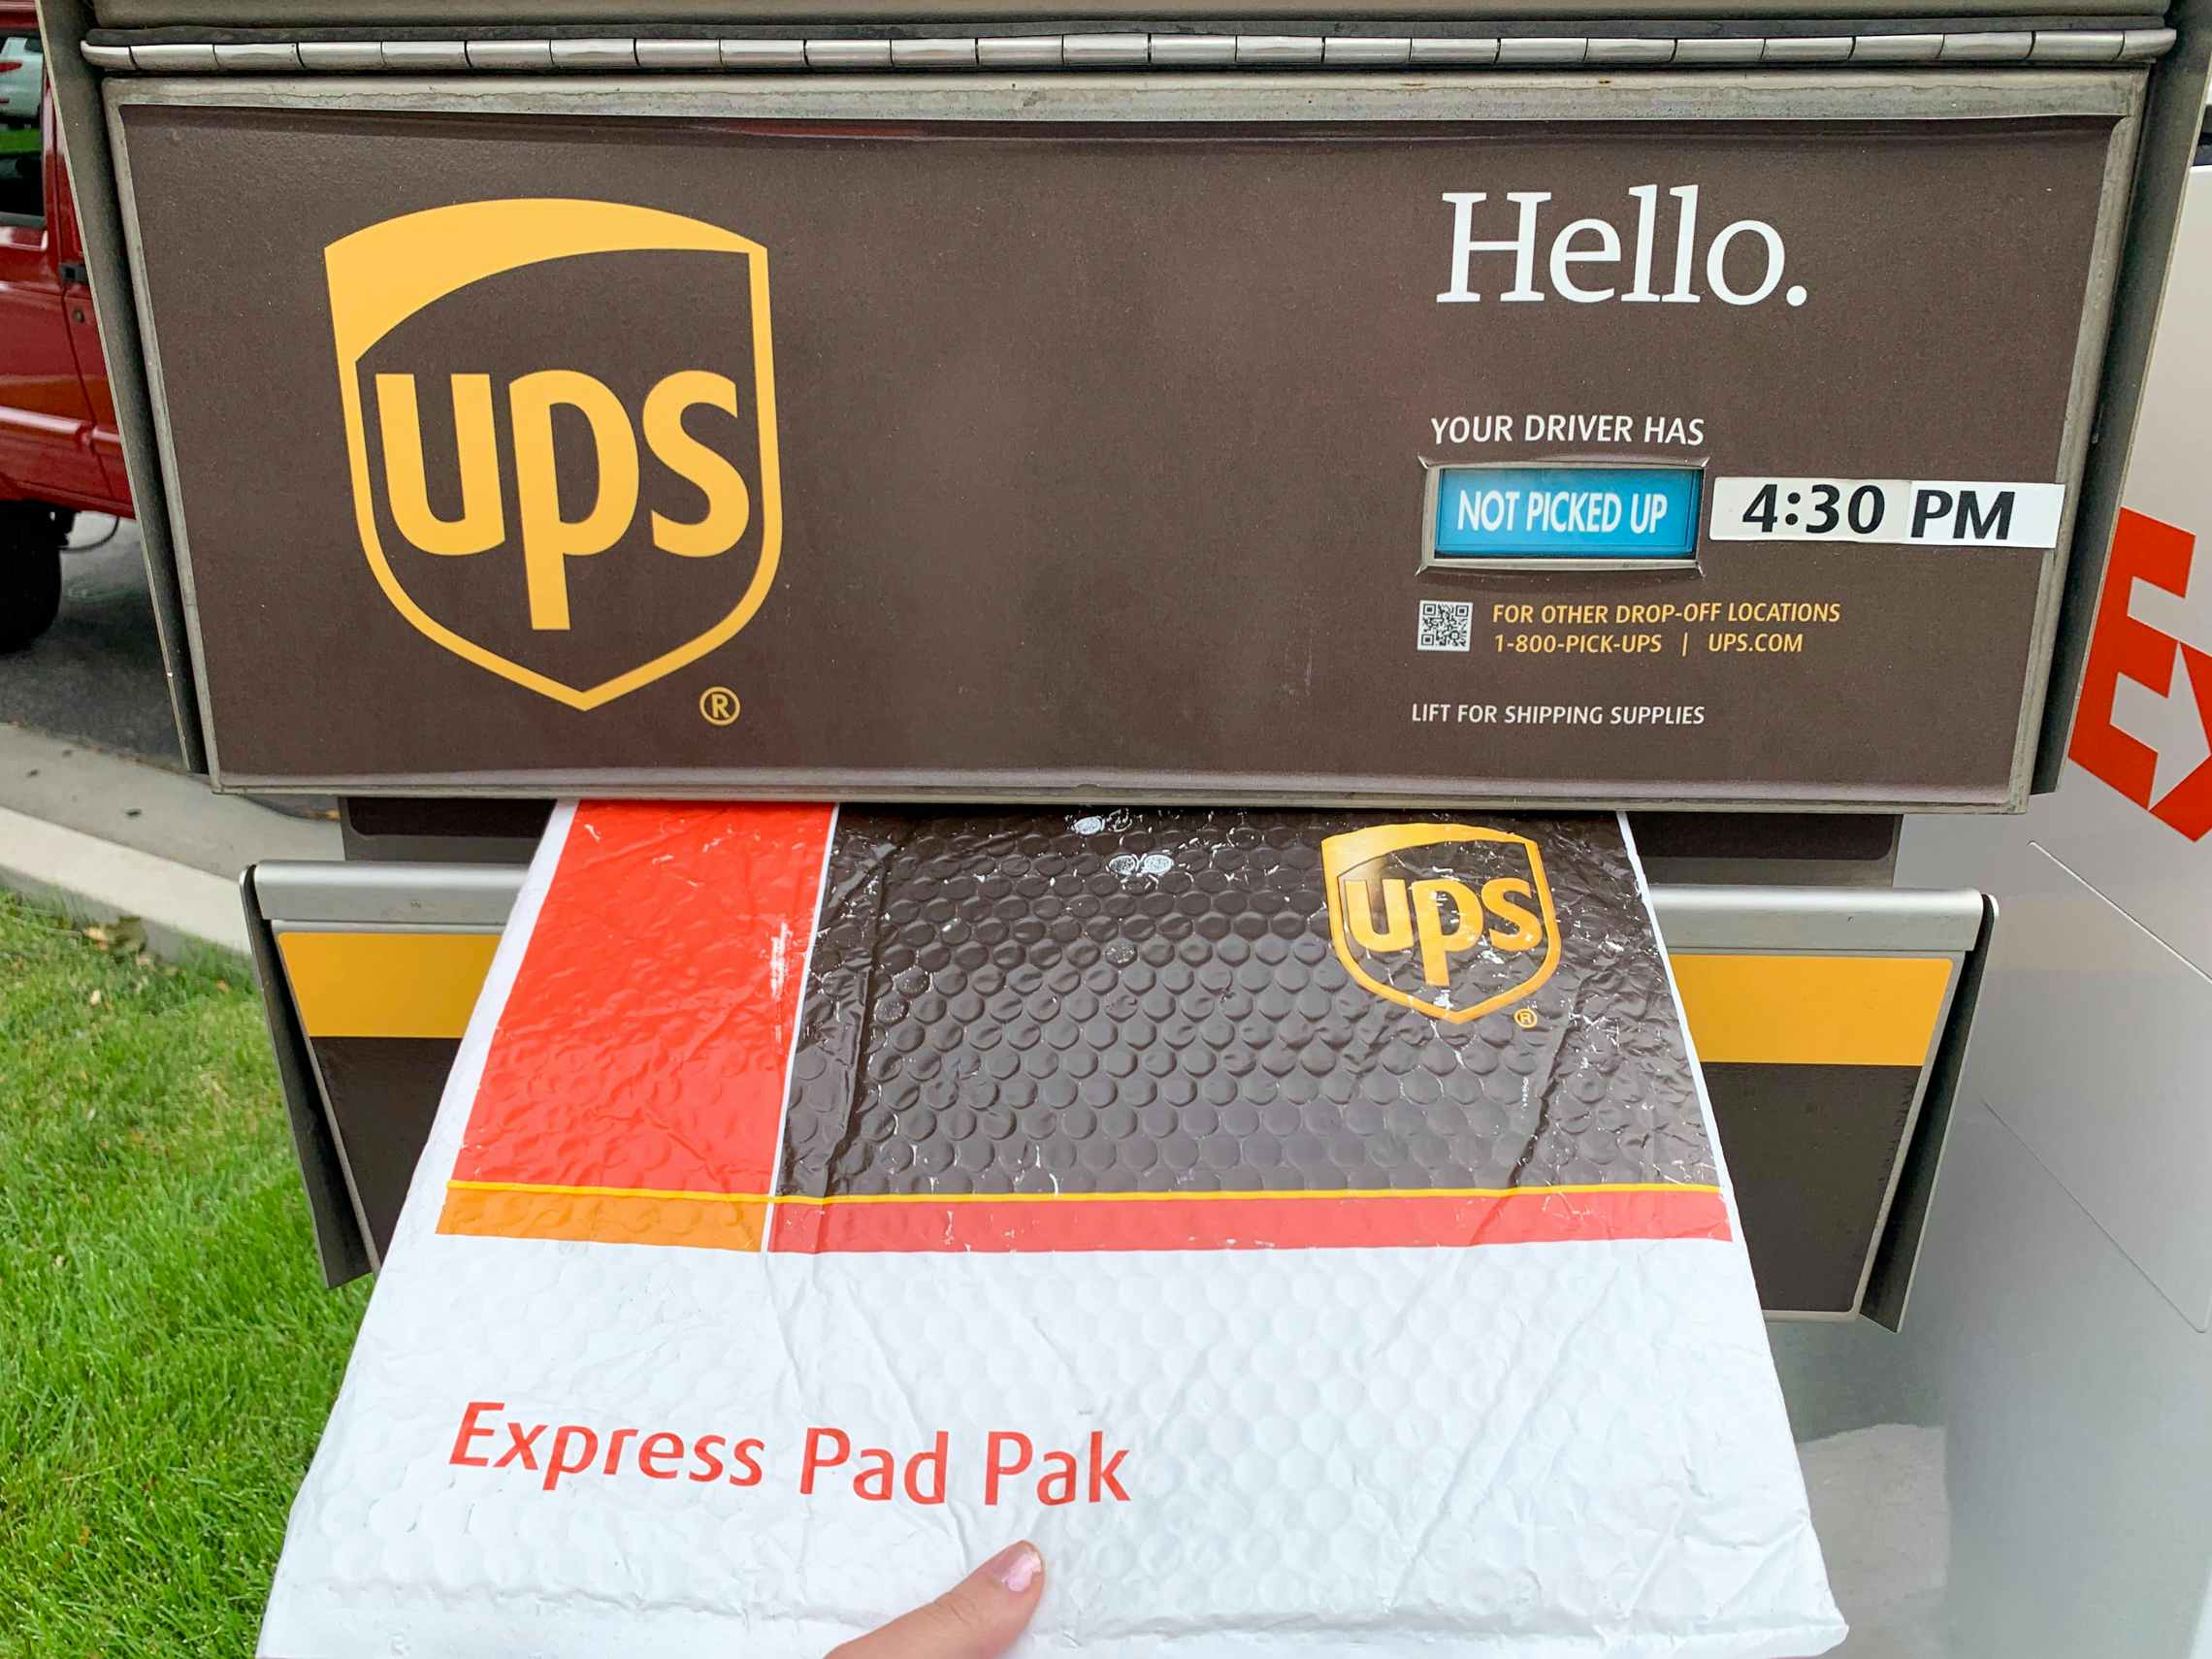 A UPS package being dropped in a UPS mail box.